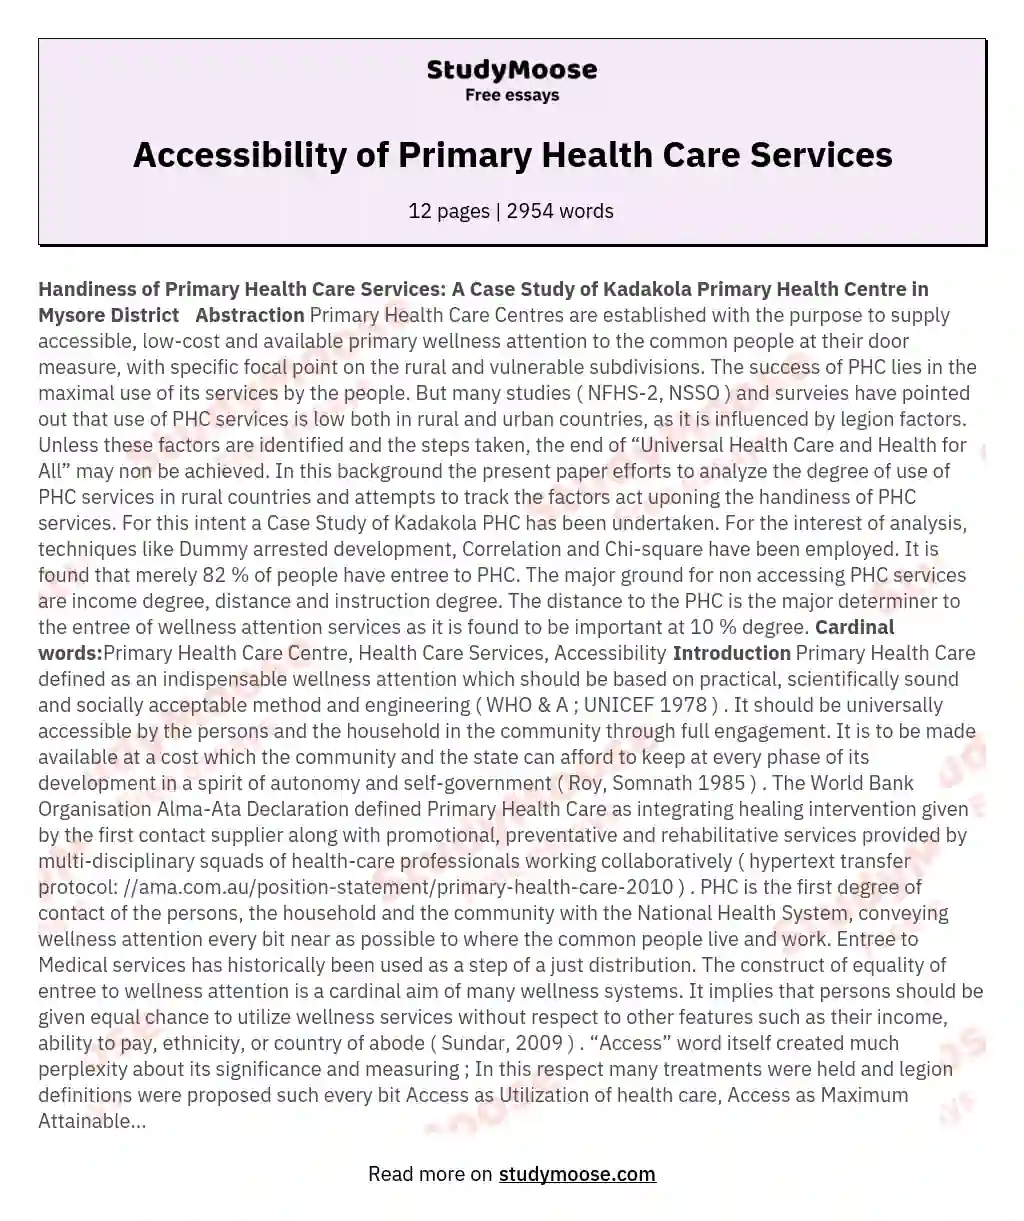 Accessibility of Primary Health Care Services essay